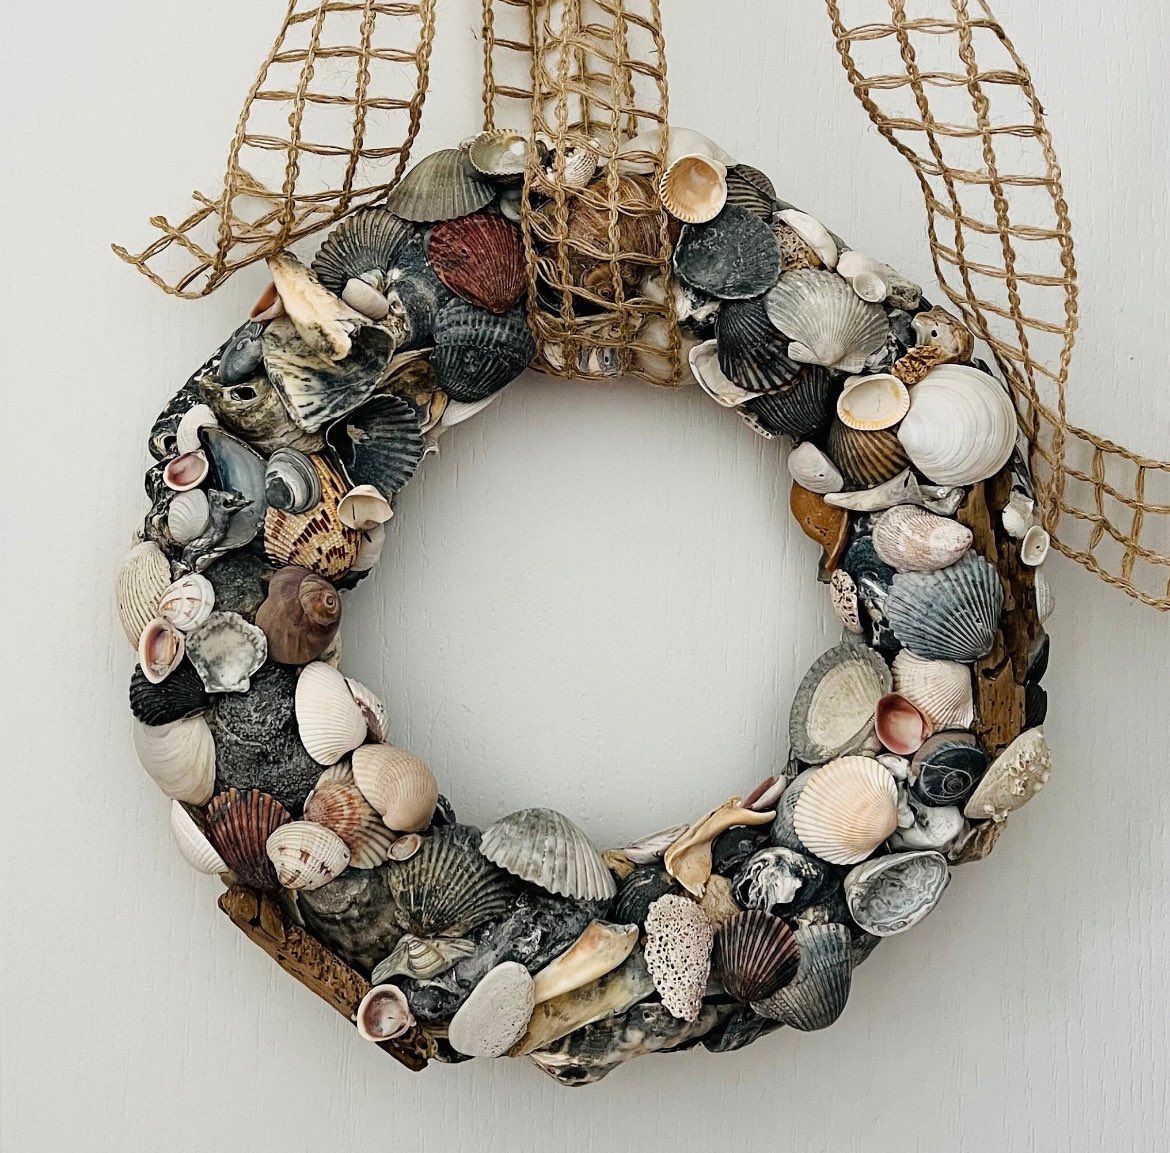 This beautiful coastal seashell wreath is made with shells collected along with Atlantic Coast of Virginia Beach, VA and the Gulf Coast of Clearwater, FL.  They can be used throughout the year to give your home a great coastal vibe. #coastaldecor #coastalliving #coastal